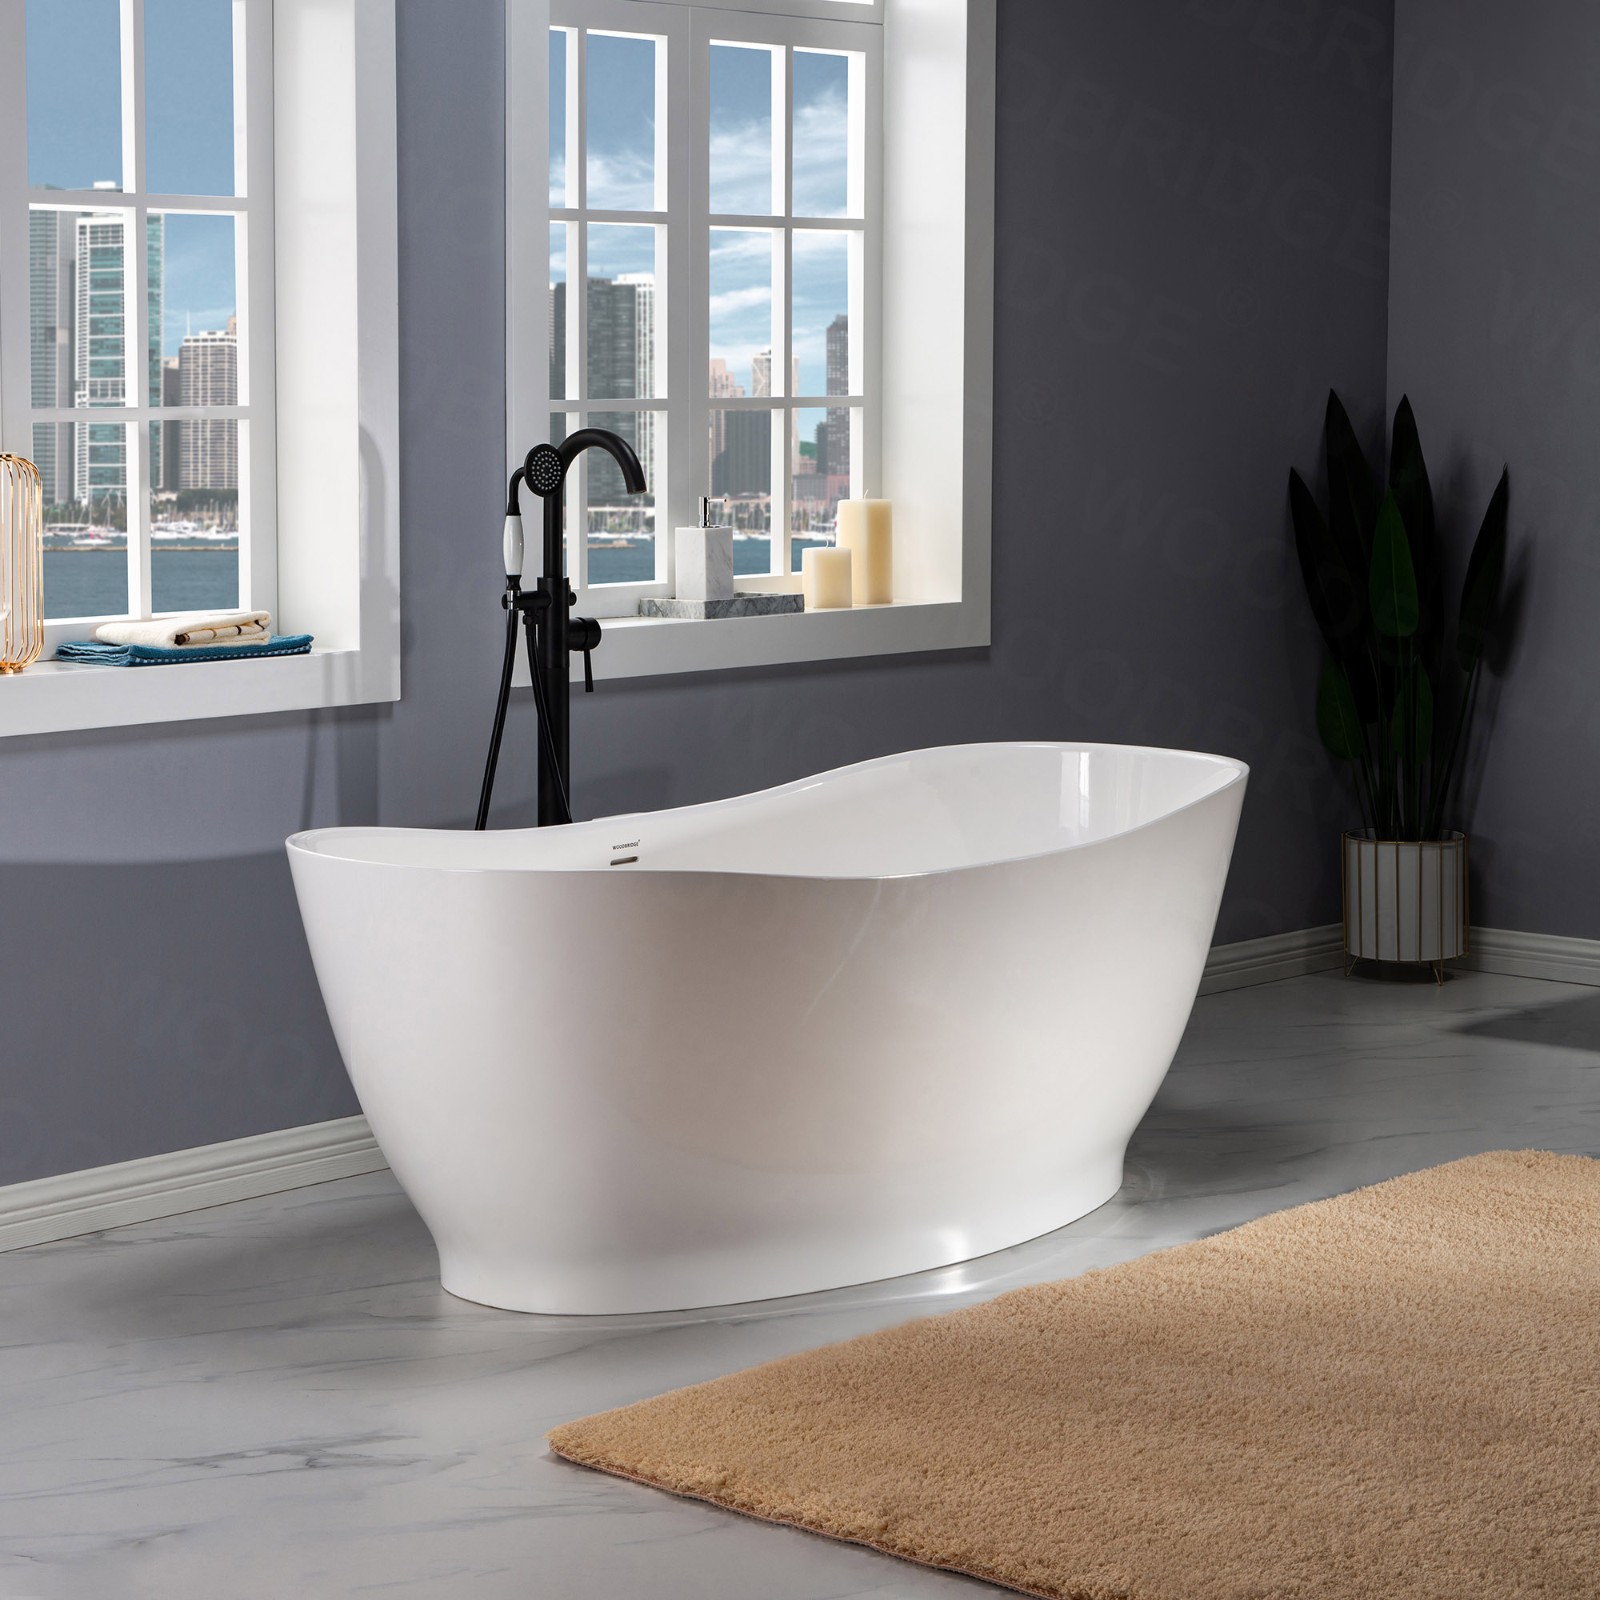  WOODBRIDGE 66 in. Freestanding Solid Surface Double Slipper Soaking Bathtub with Center Drain Assembly and Overflow, B0052/BTA0052, Glossy White_8386